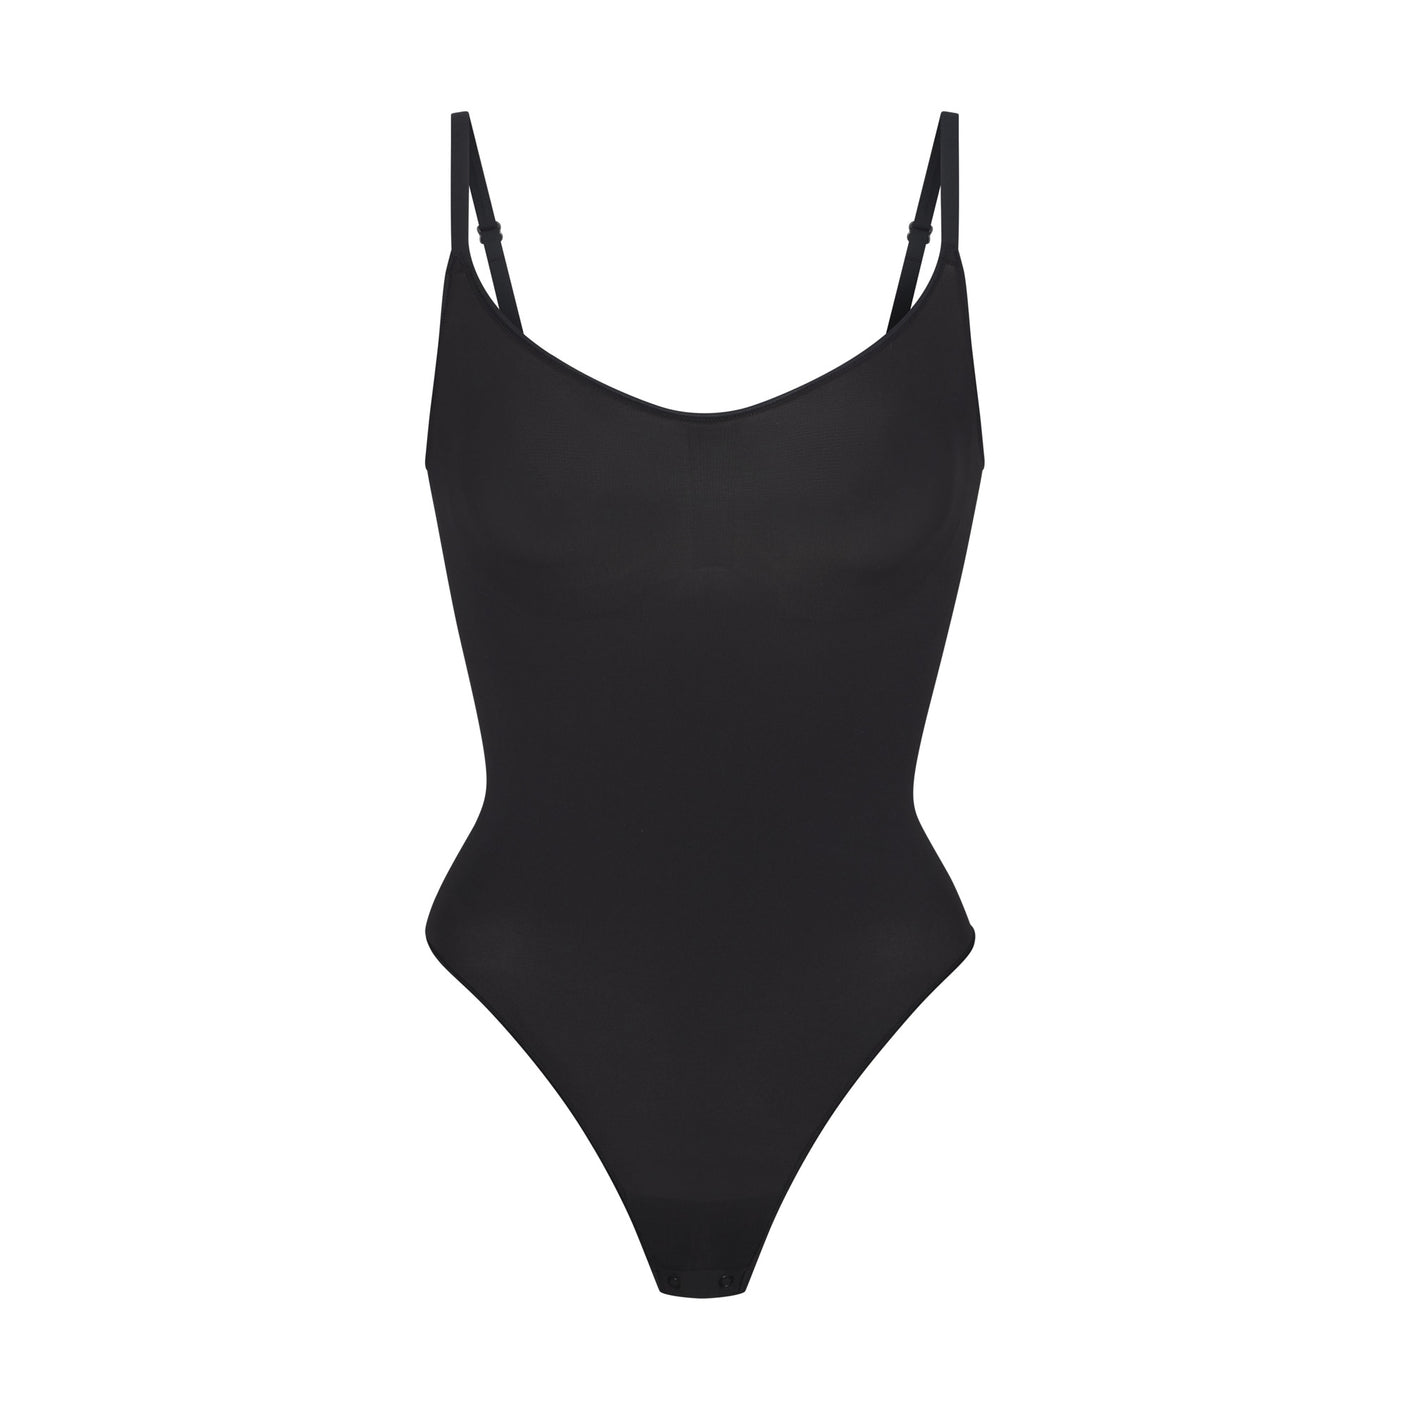 SKIMS - This is it: signature SKIMS shapewear staples made